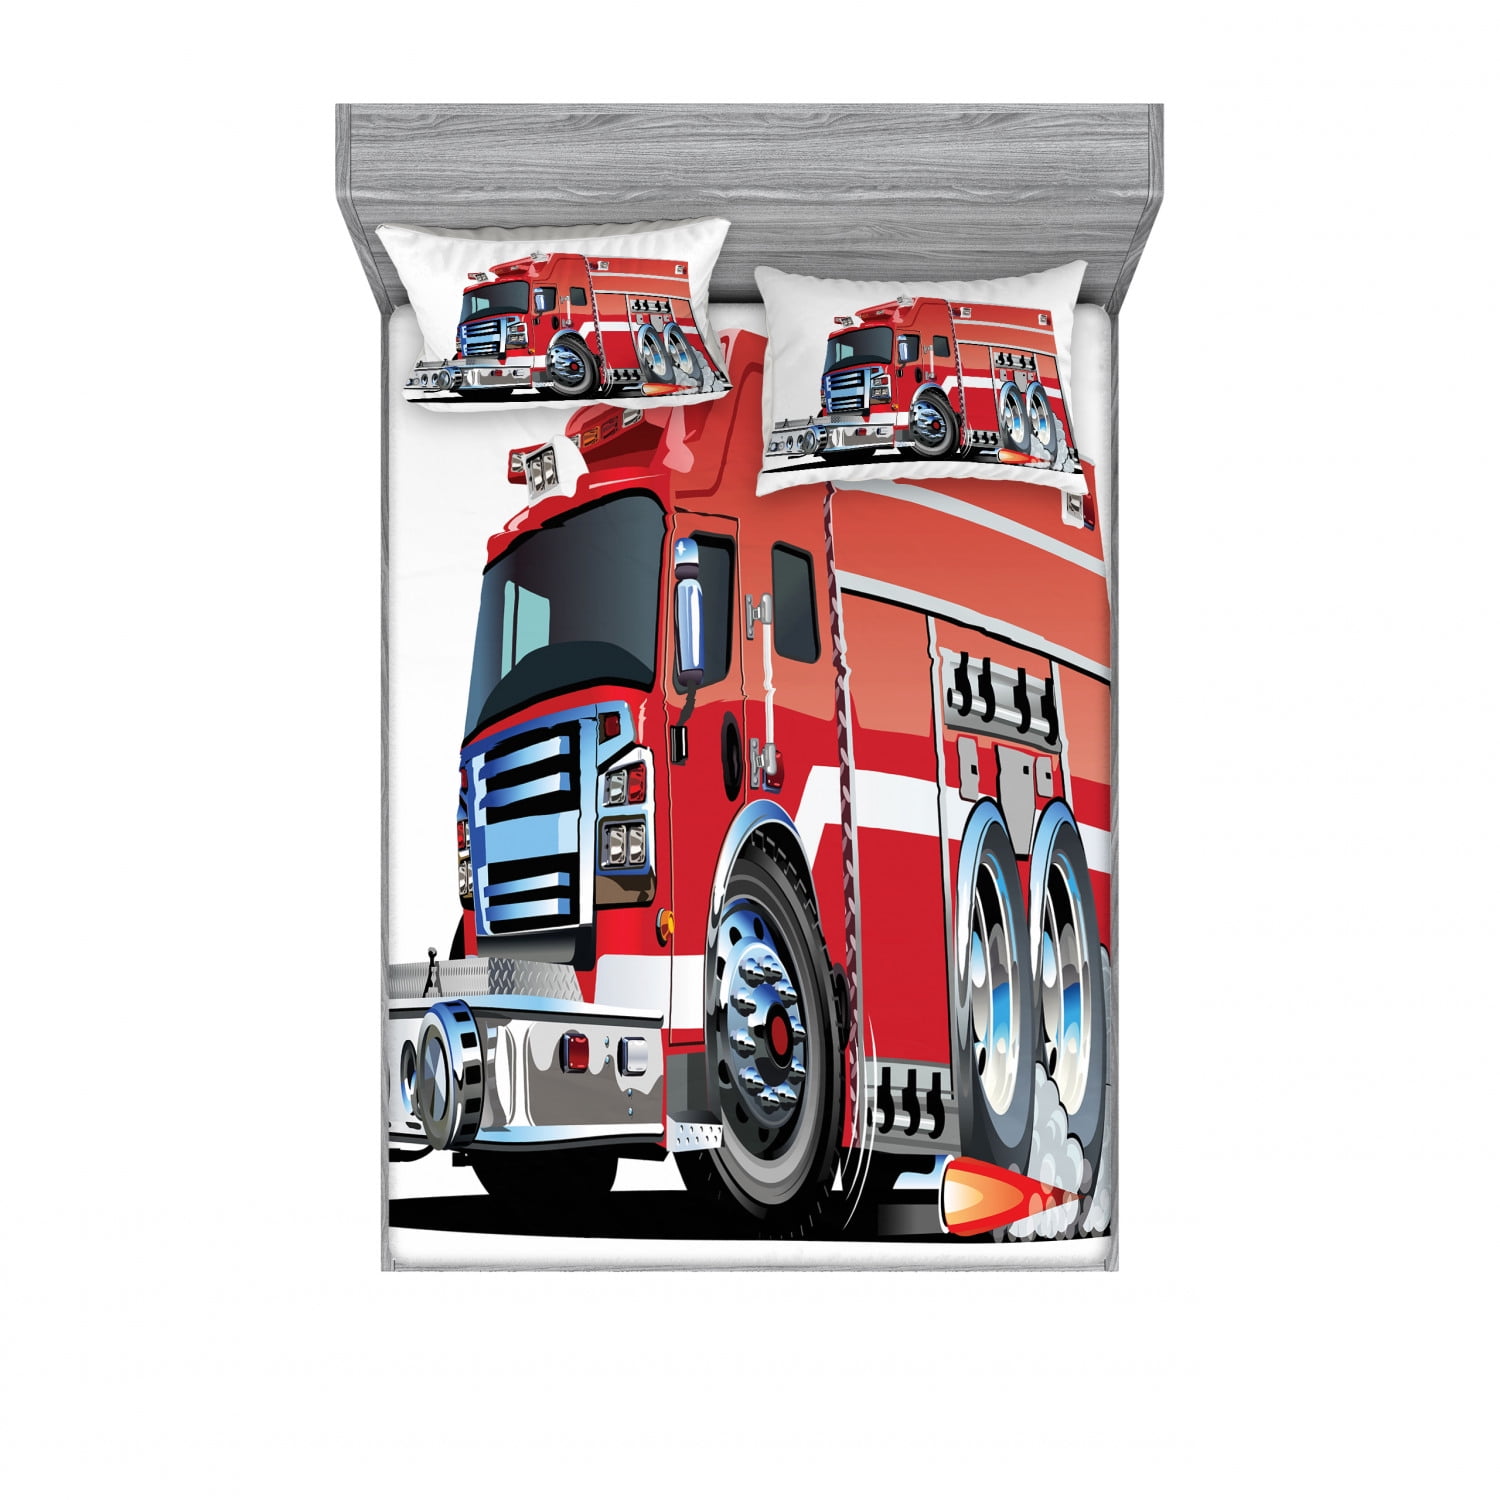 Cars Bedding Set with Sheet & Covers, Big Fire Truck Emergency Equipments  Universal Safety Rescue Team Engine Cartoon, Printed Bedroom Decor 2 Shams,  4 Sizes, Red Grey, by Ambesonne 